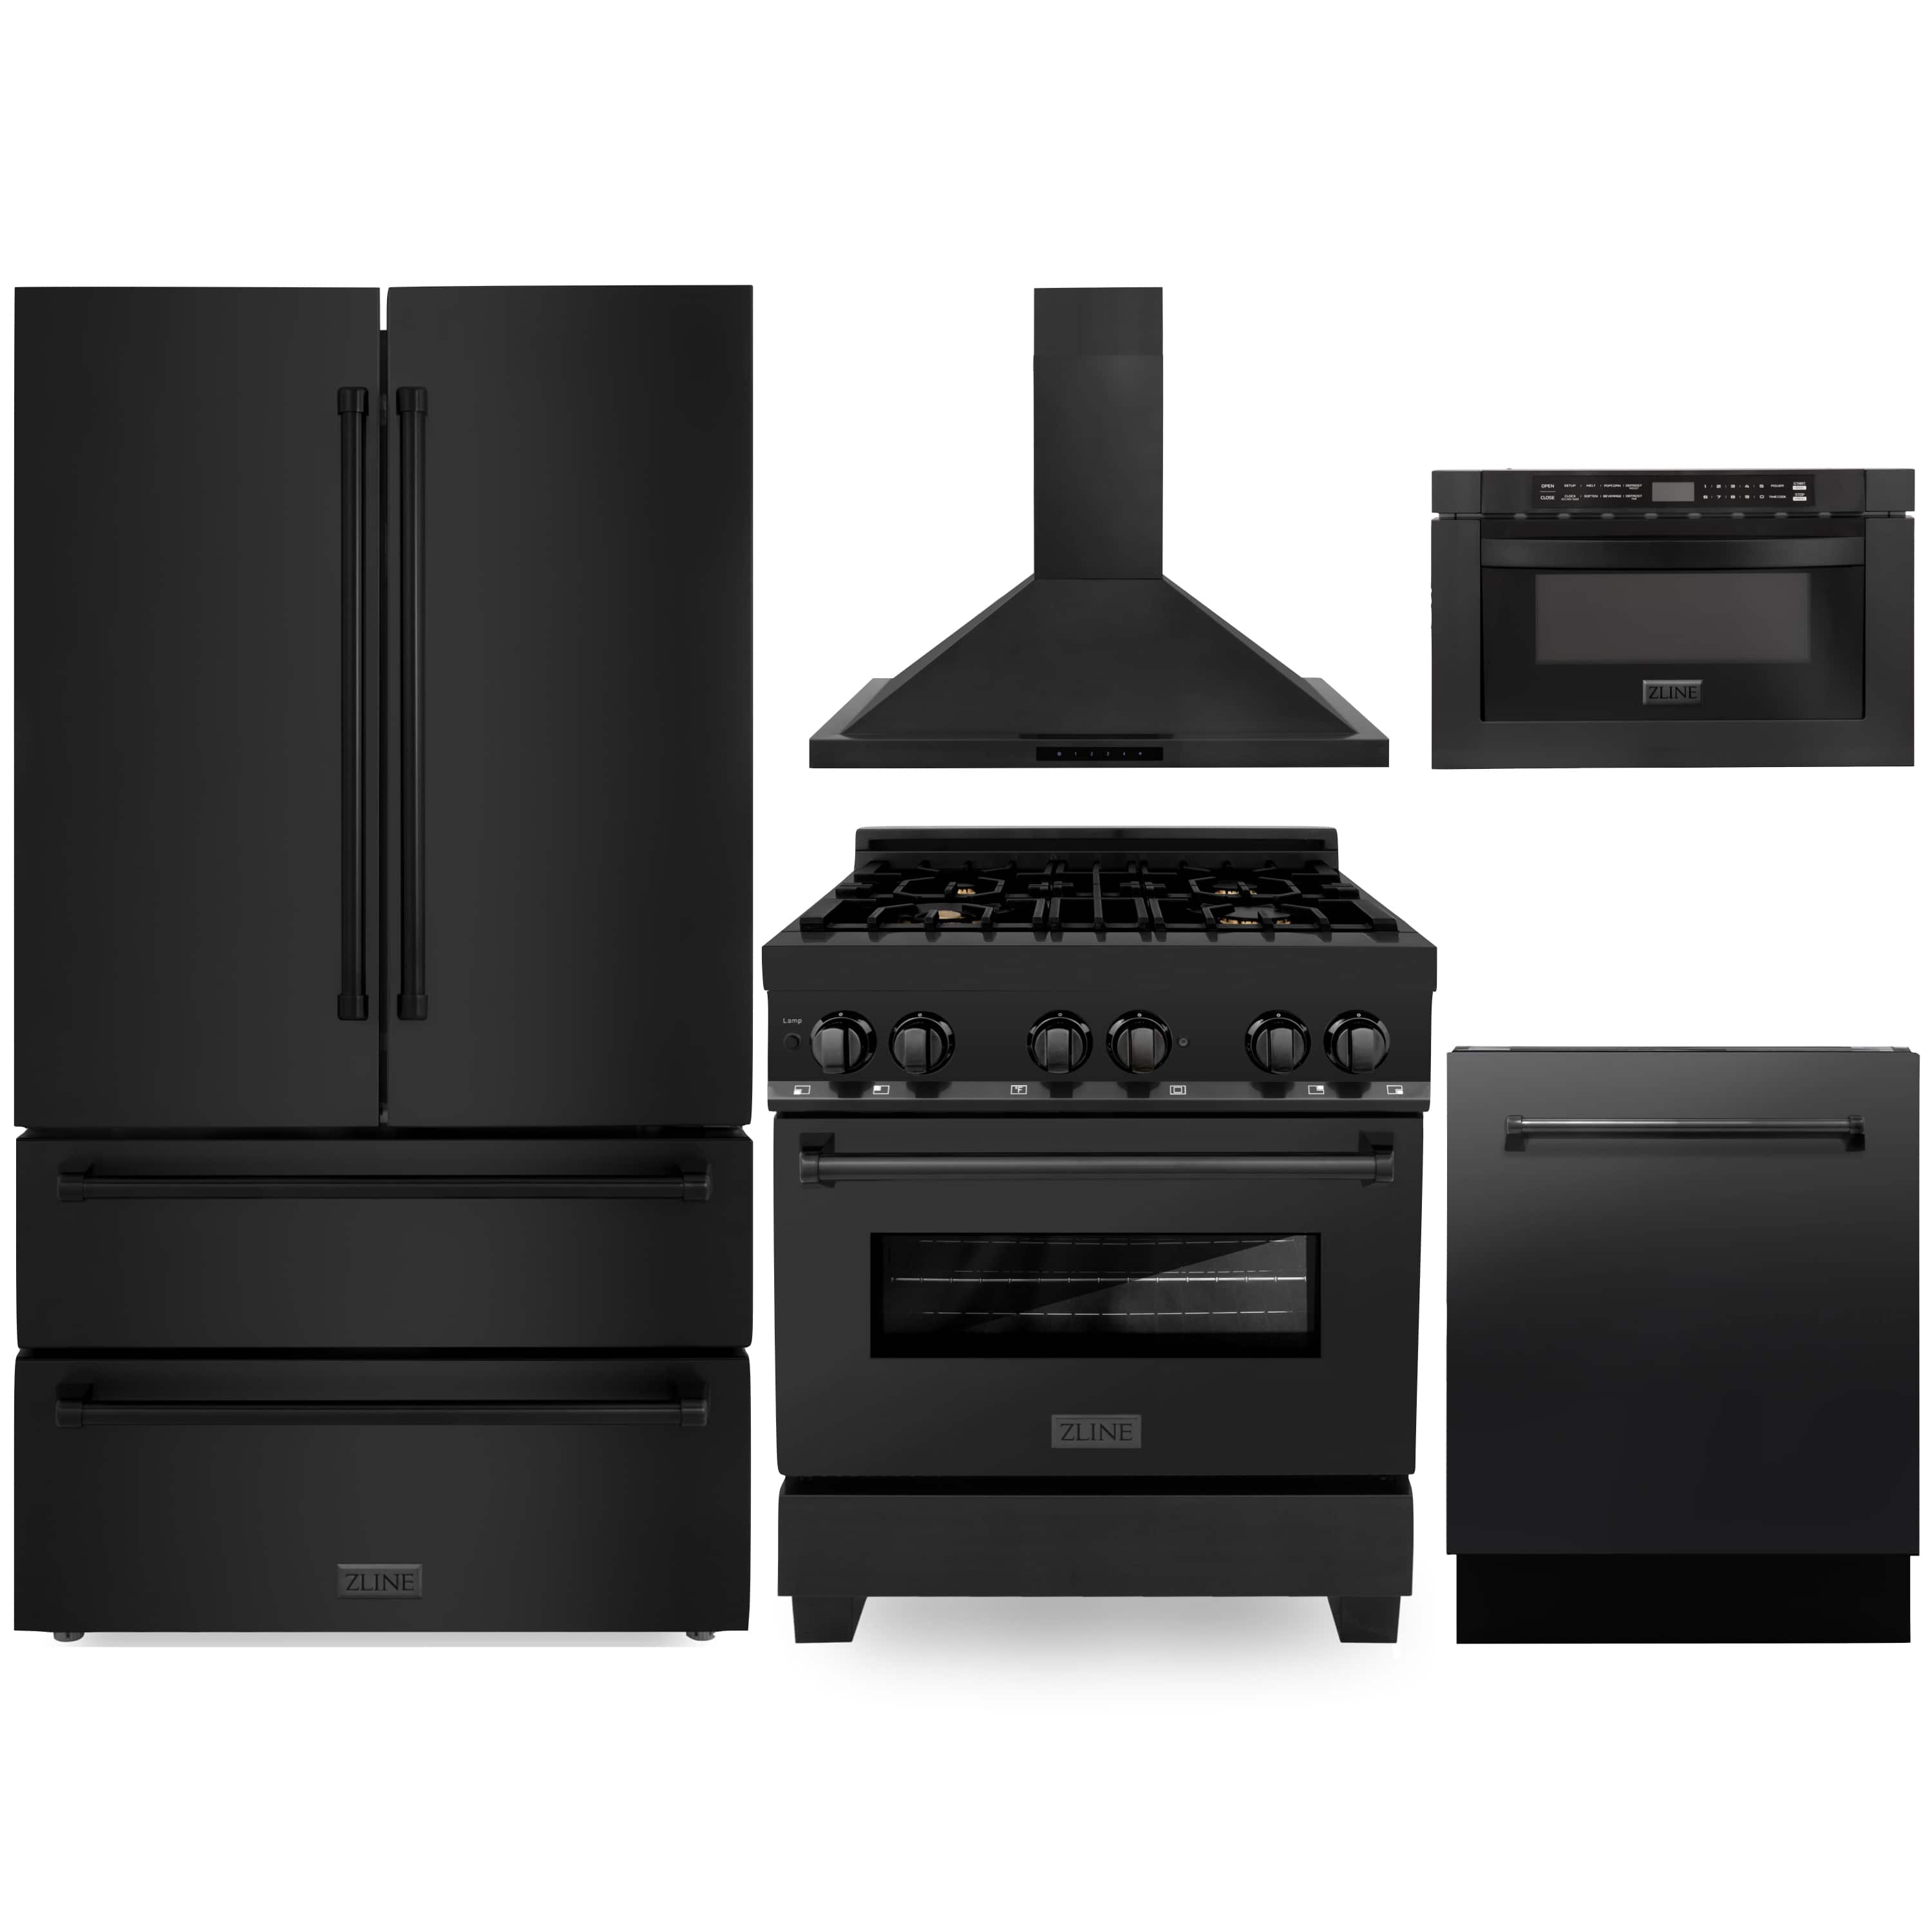 ZLINE 5-Piece Appliance Package - 30-Inch Dual Fuel Range with Brass Burners, Refrigerator, Convertible Wall Mount Hood, Microwave Drawer, and 3-Rack Dishwasher in Black Stainless Steel (5KPR-RABRH-MWDWV)